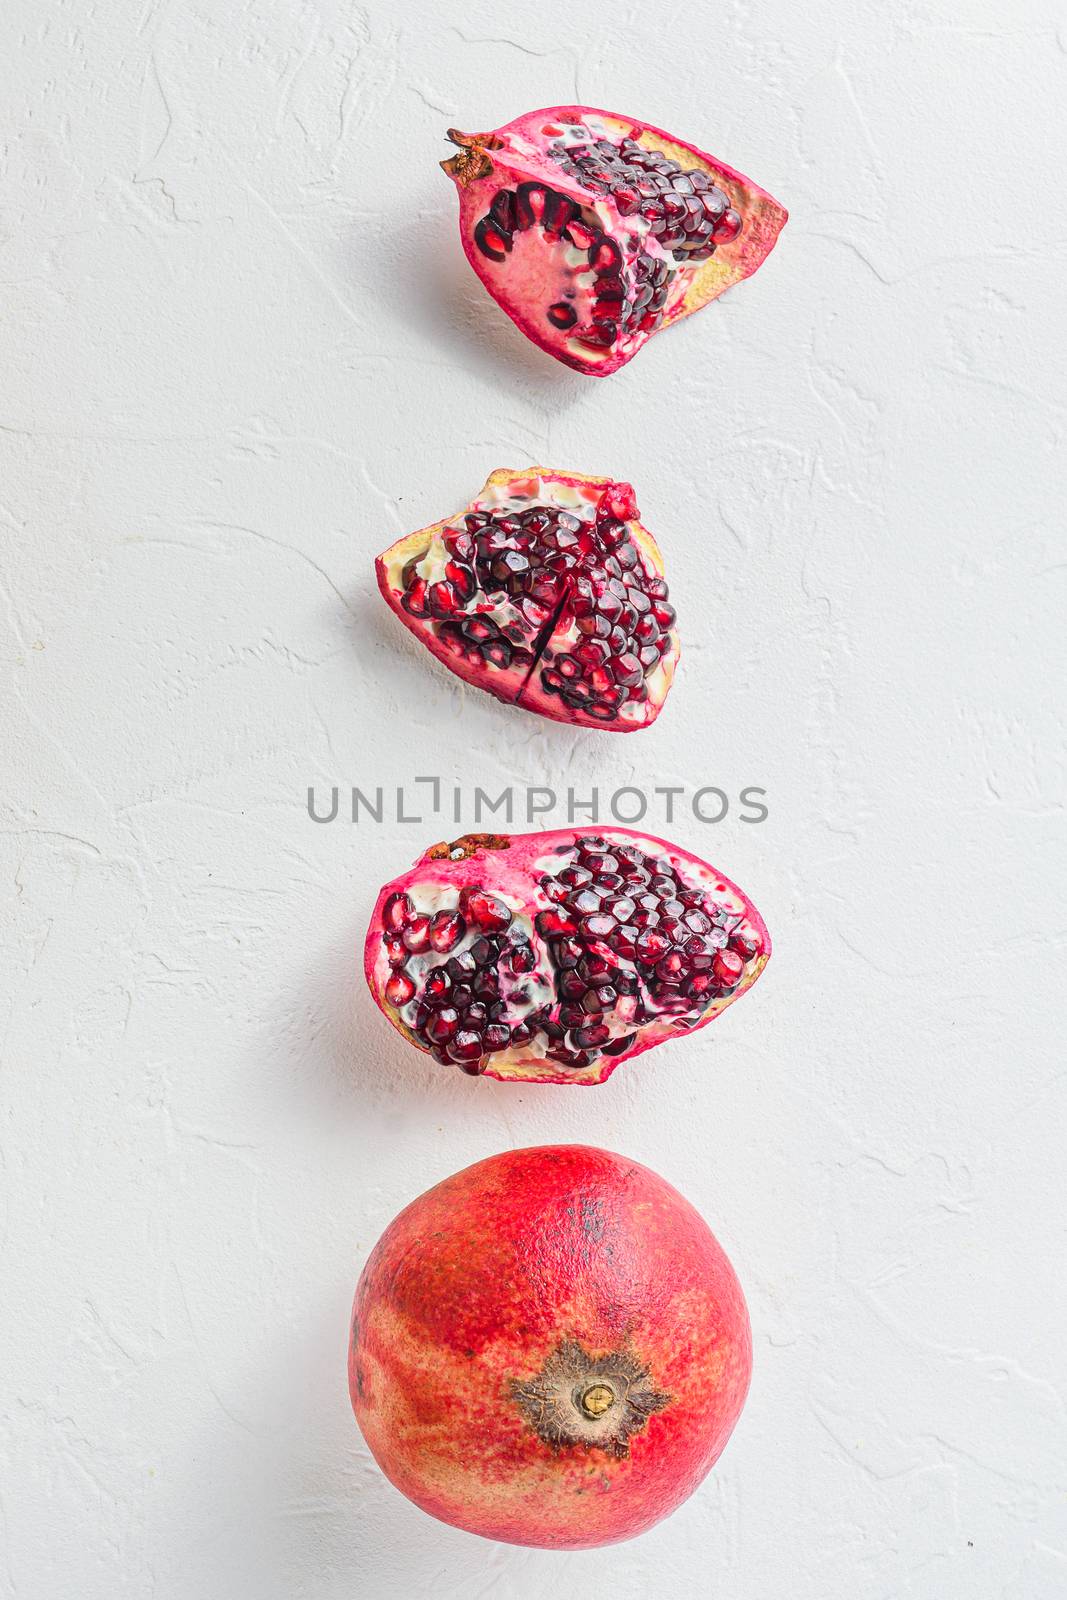 Cuts of pomegranate and whole garnet over white background, top view. by Ilianesolenyi